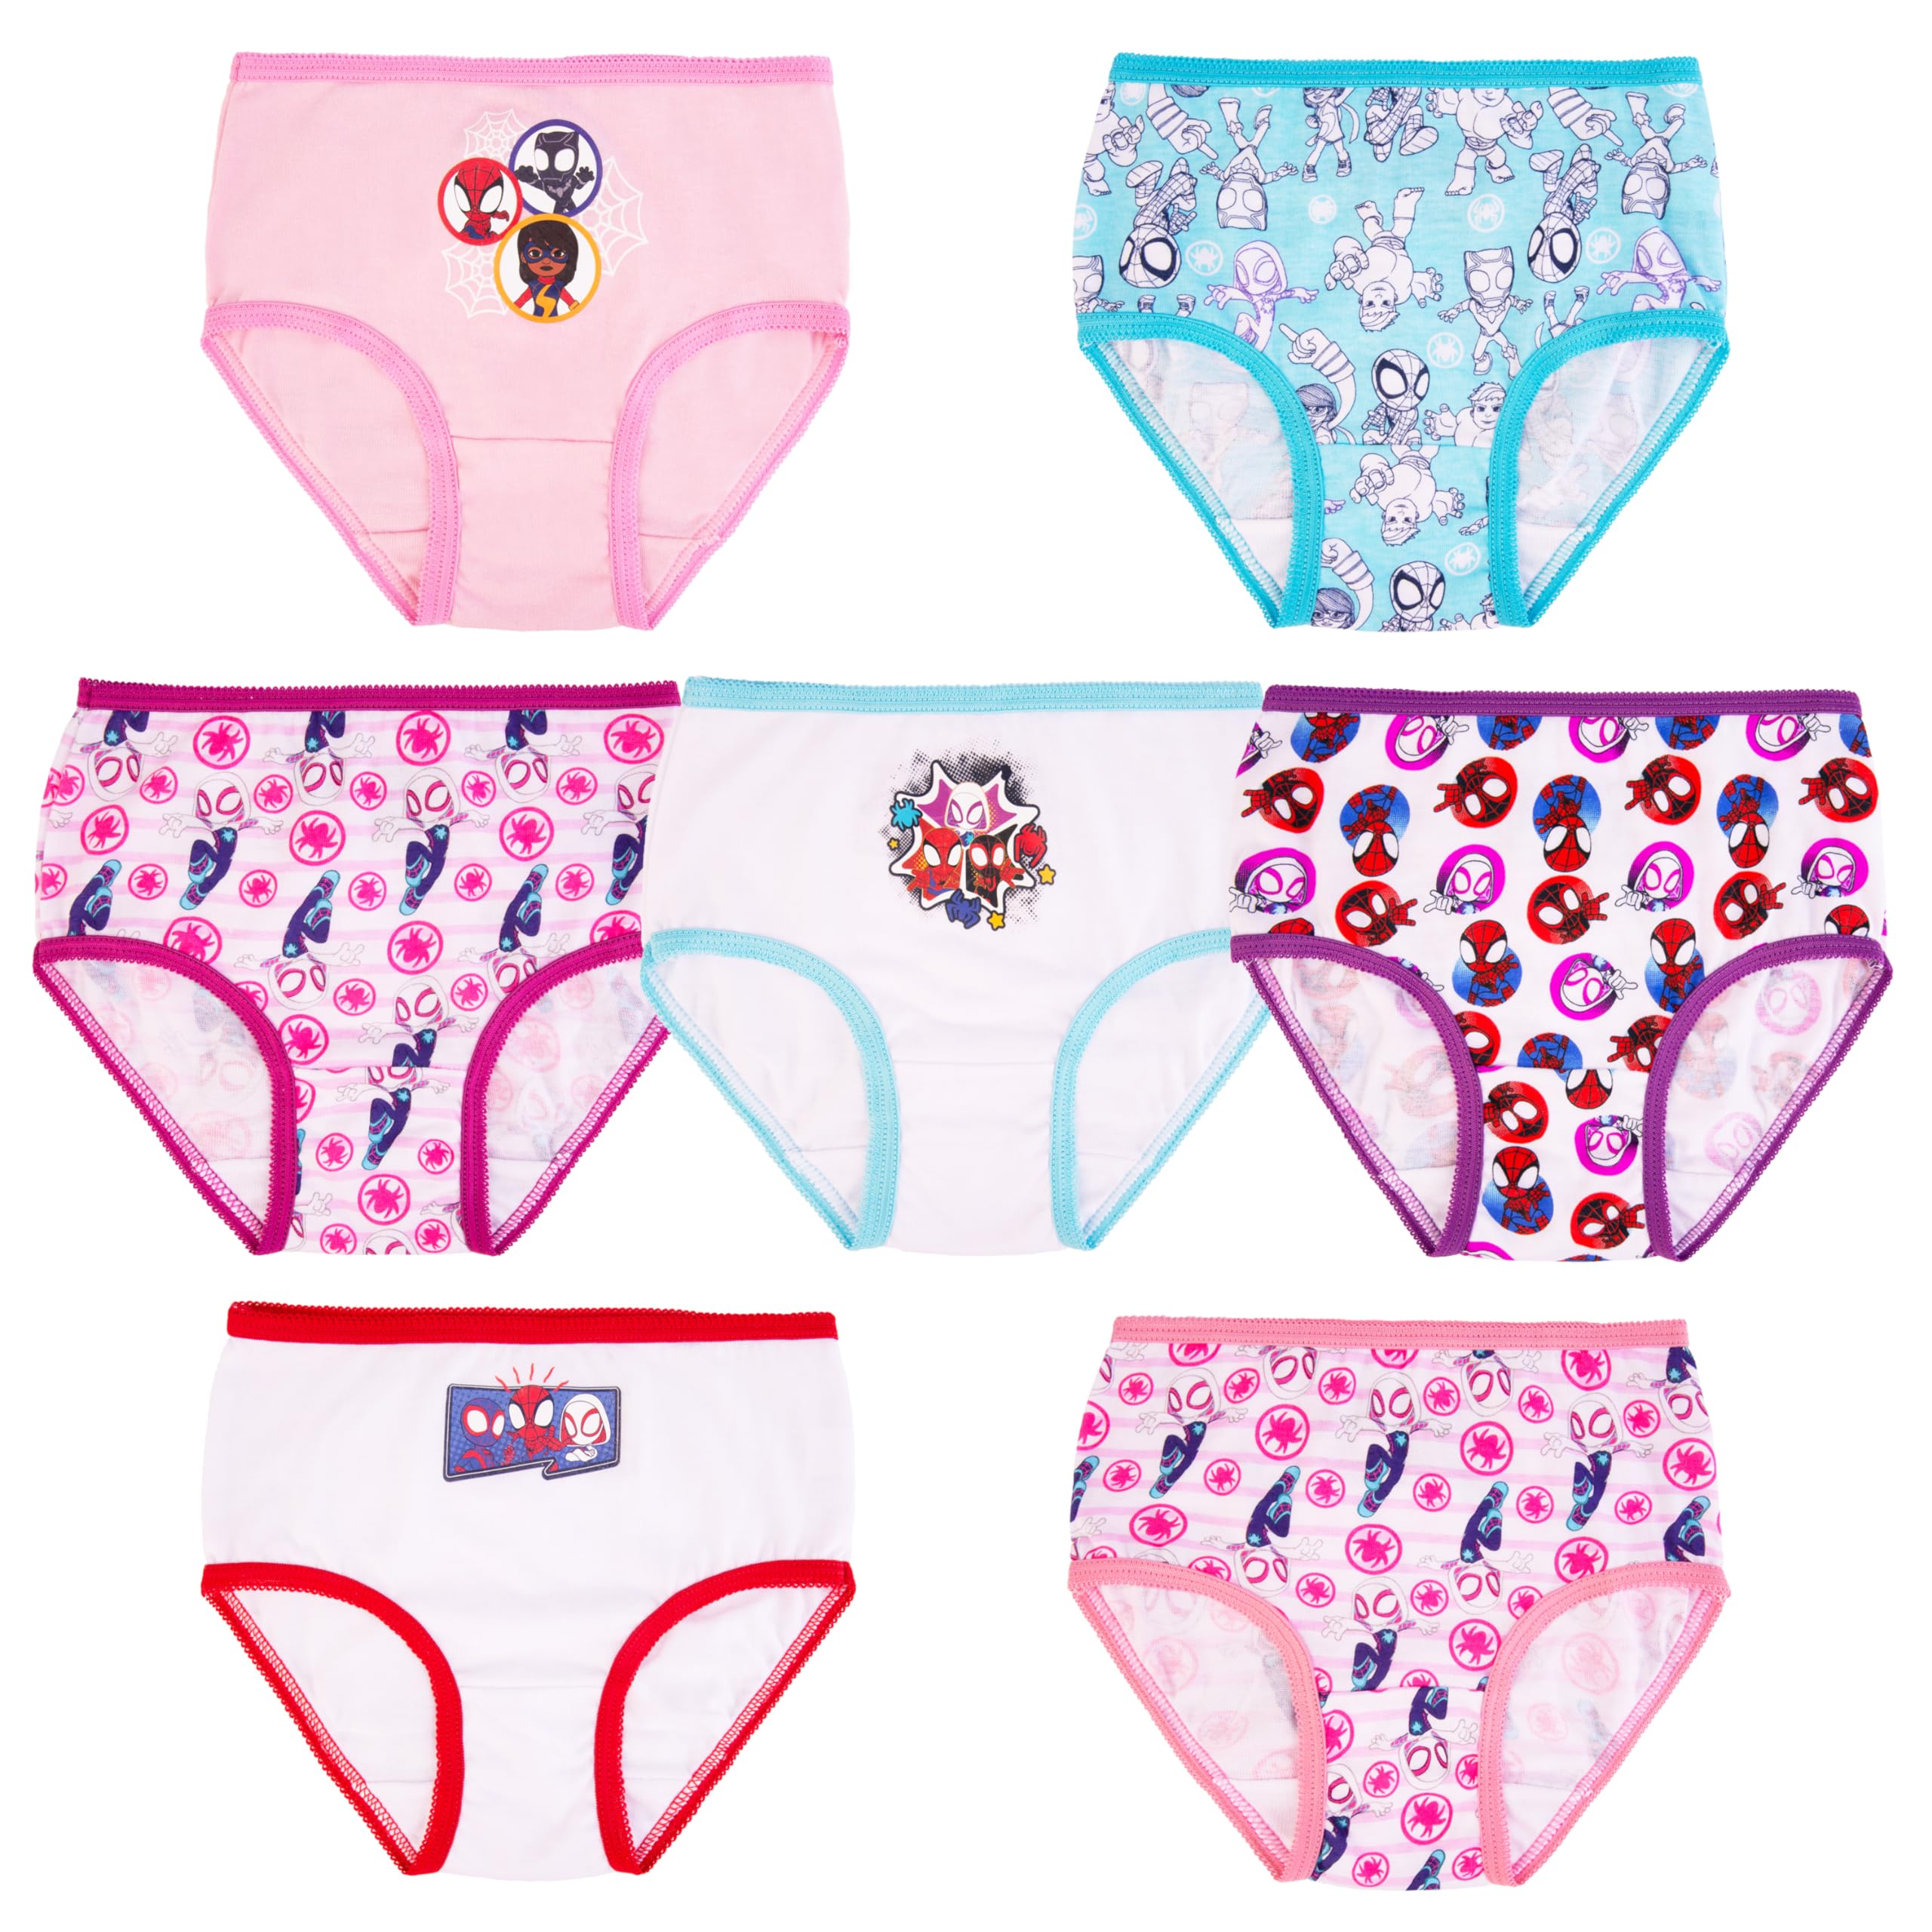 Marvel Girls' Spiderman & Ghost Spider Amazon Exclusive Toddler 7-Pack of 100 Panties and 4-Pack Cotton Span Blend, 2/3t-10